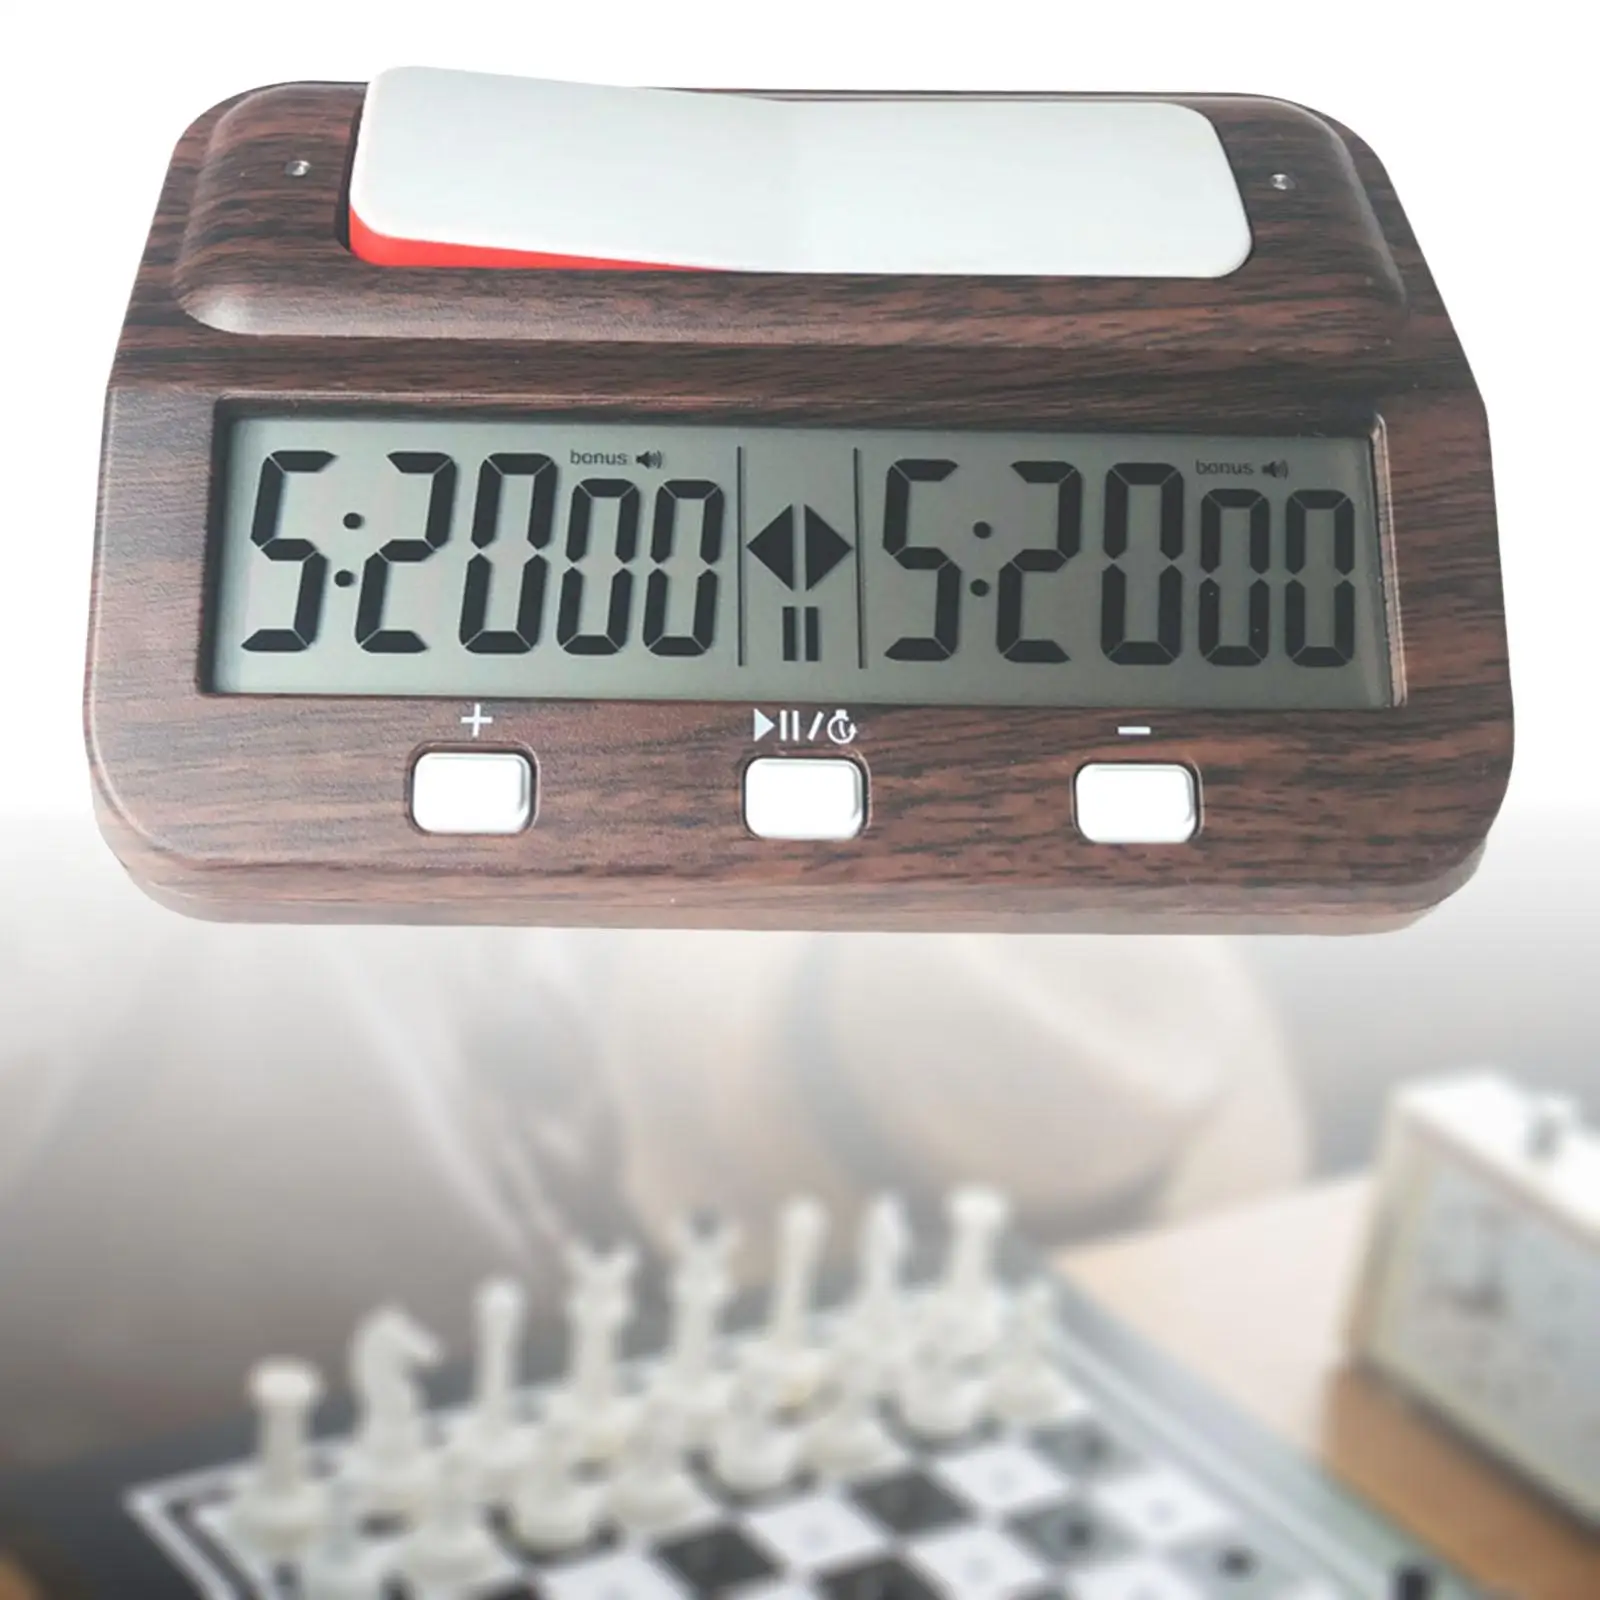 Chess Clock International Chess Timer Clock Analogue Chess Clock Tournament Clock Portable for Chinese Chess Game Competition